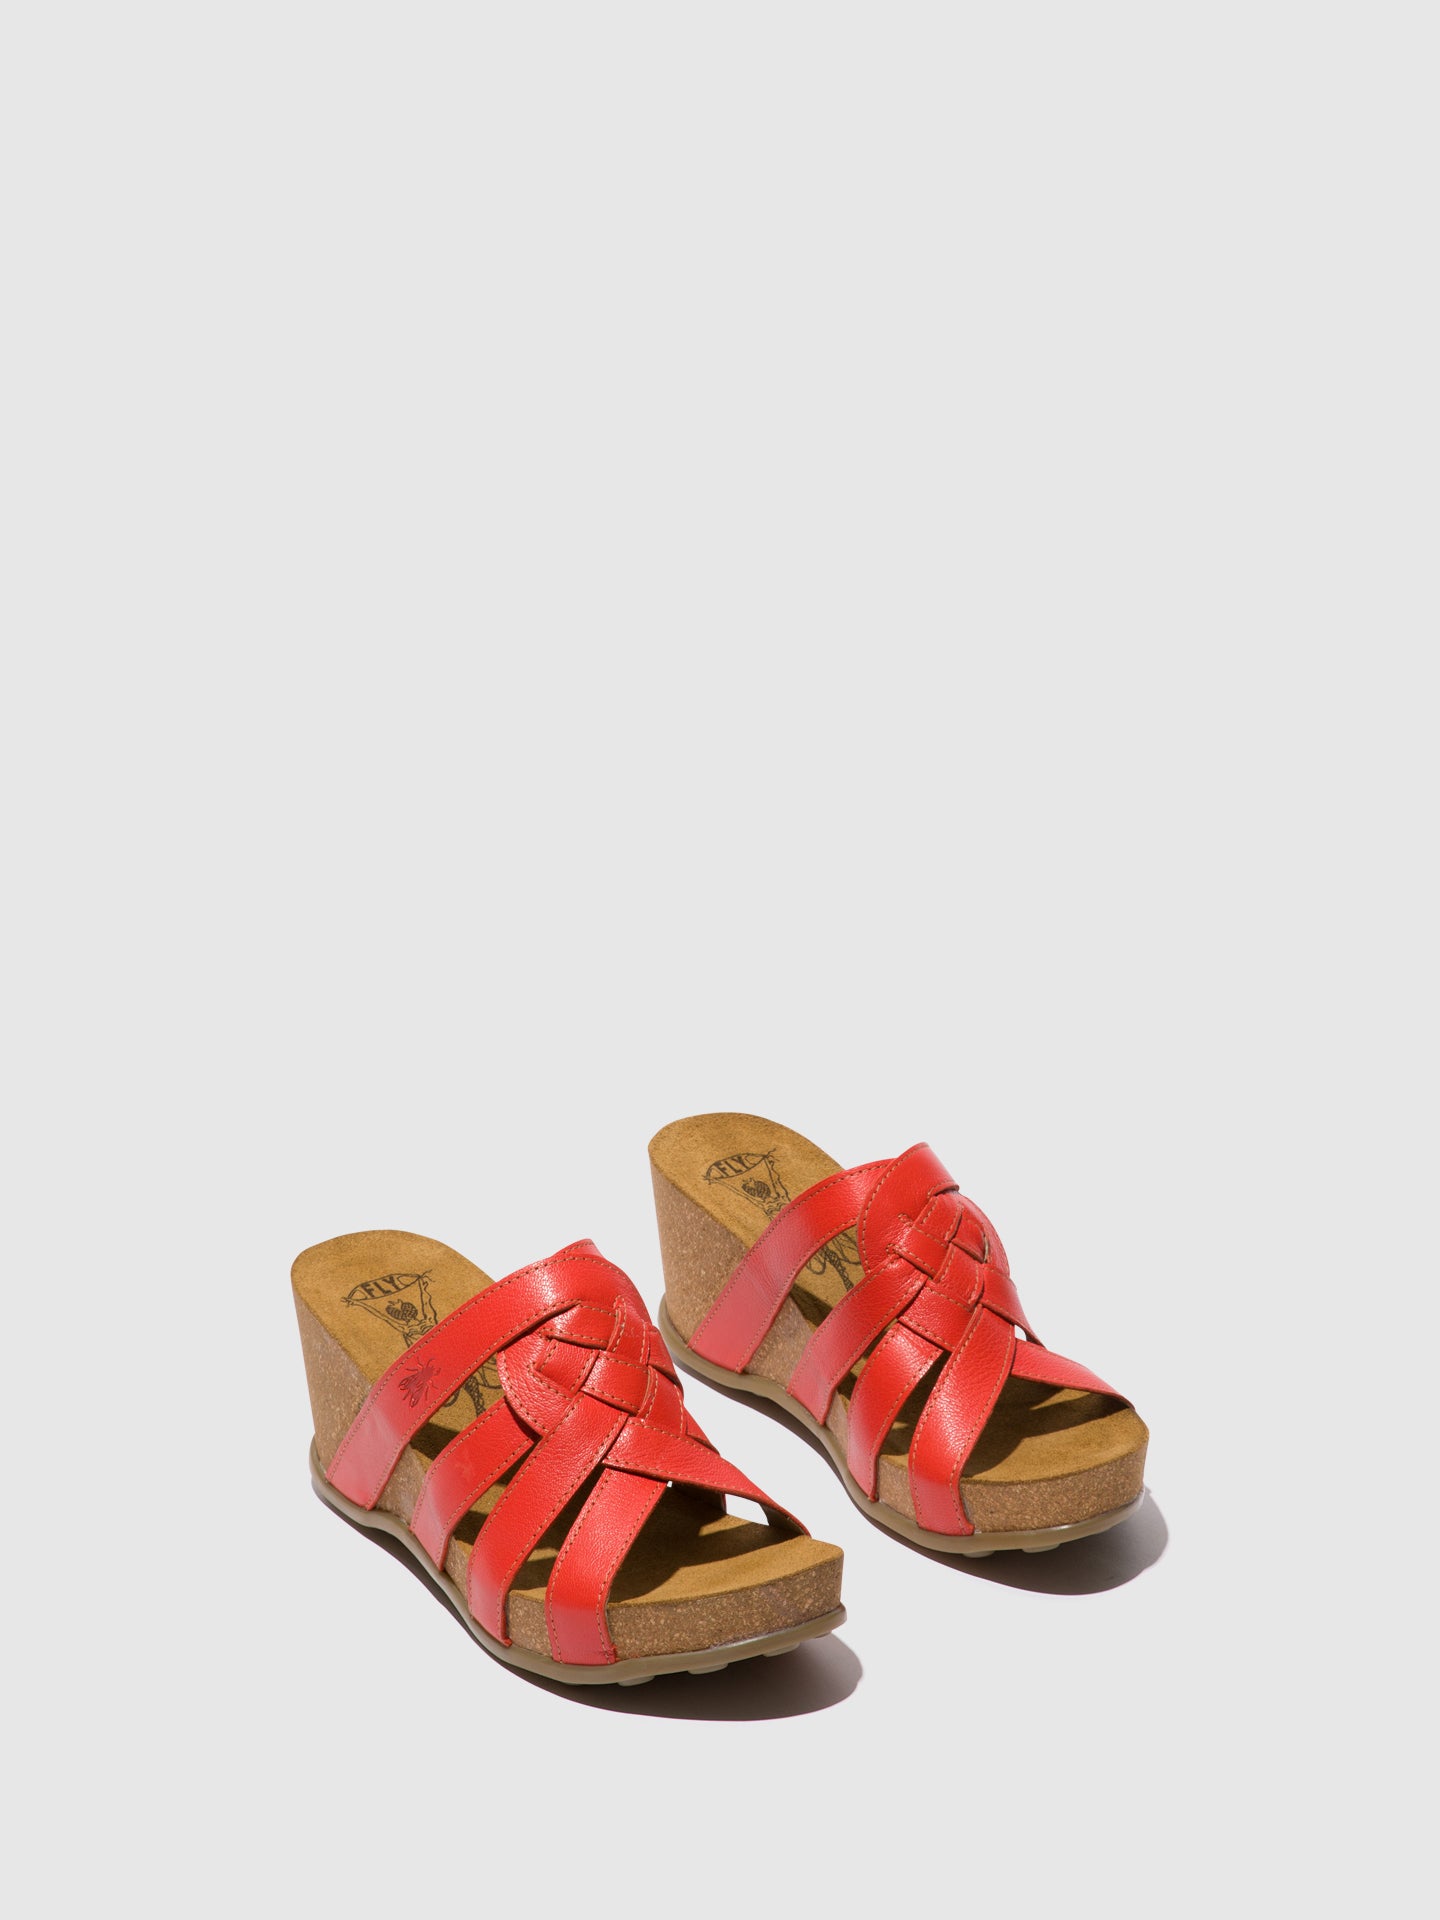 Fly London Strappy Mules GILY774LY DEVIL RED